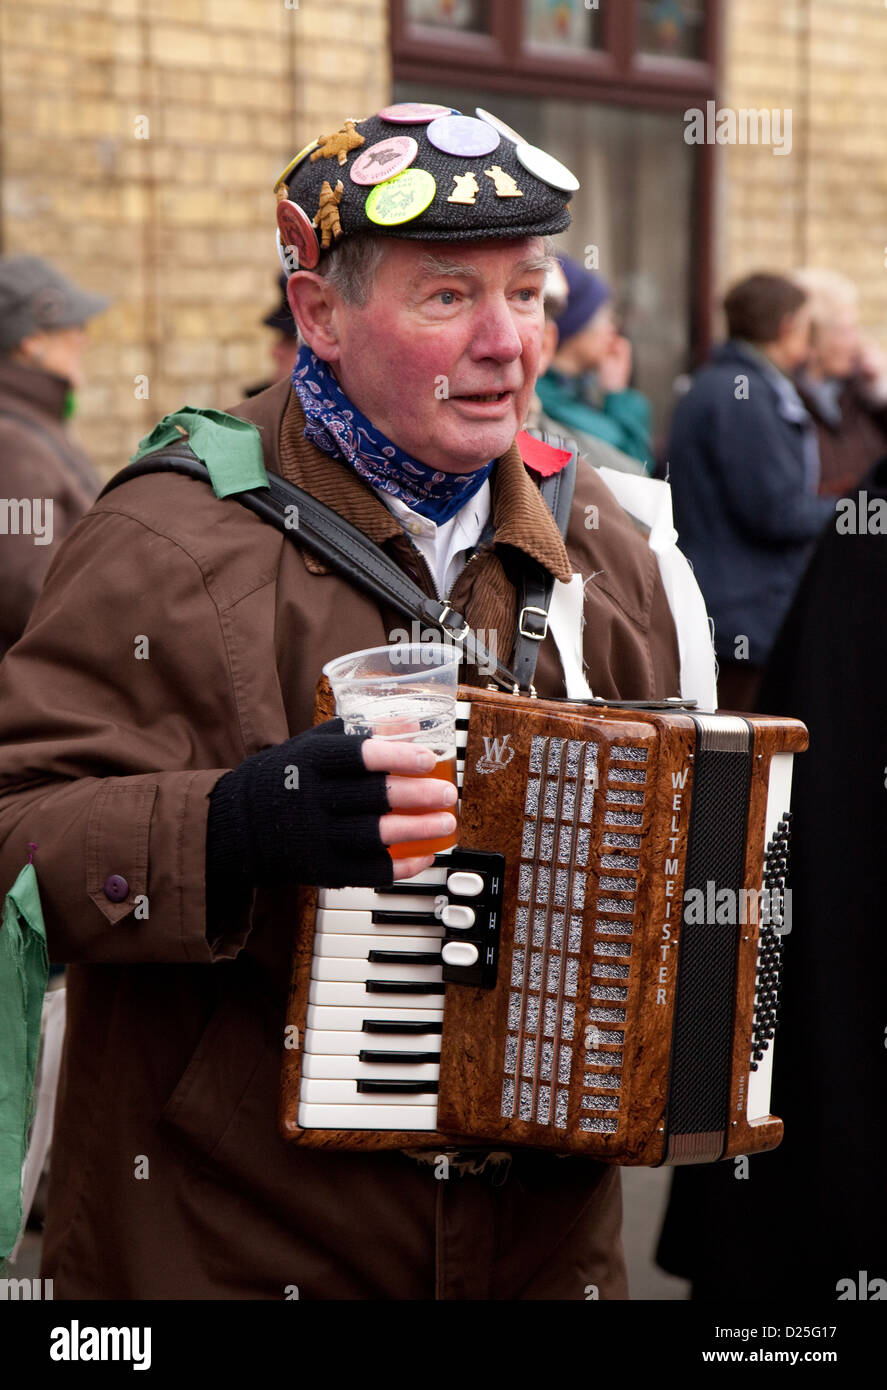 A musician man playing a melodeon accordion and drinking beer, Whittlesey straw bear festival, UK Stock Photo